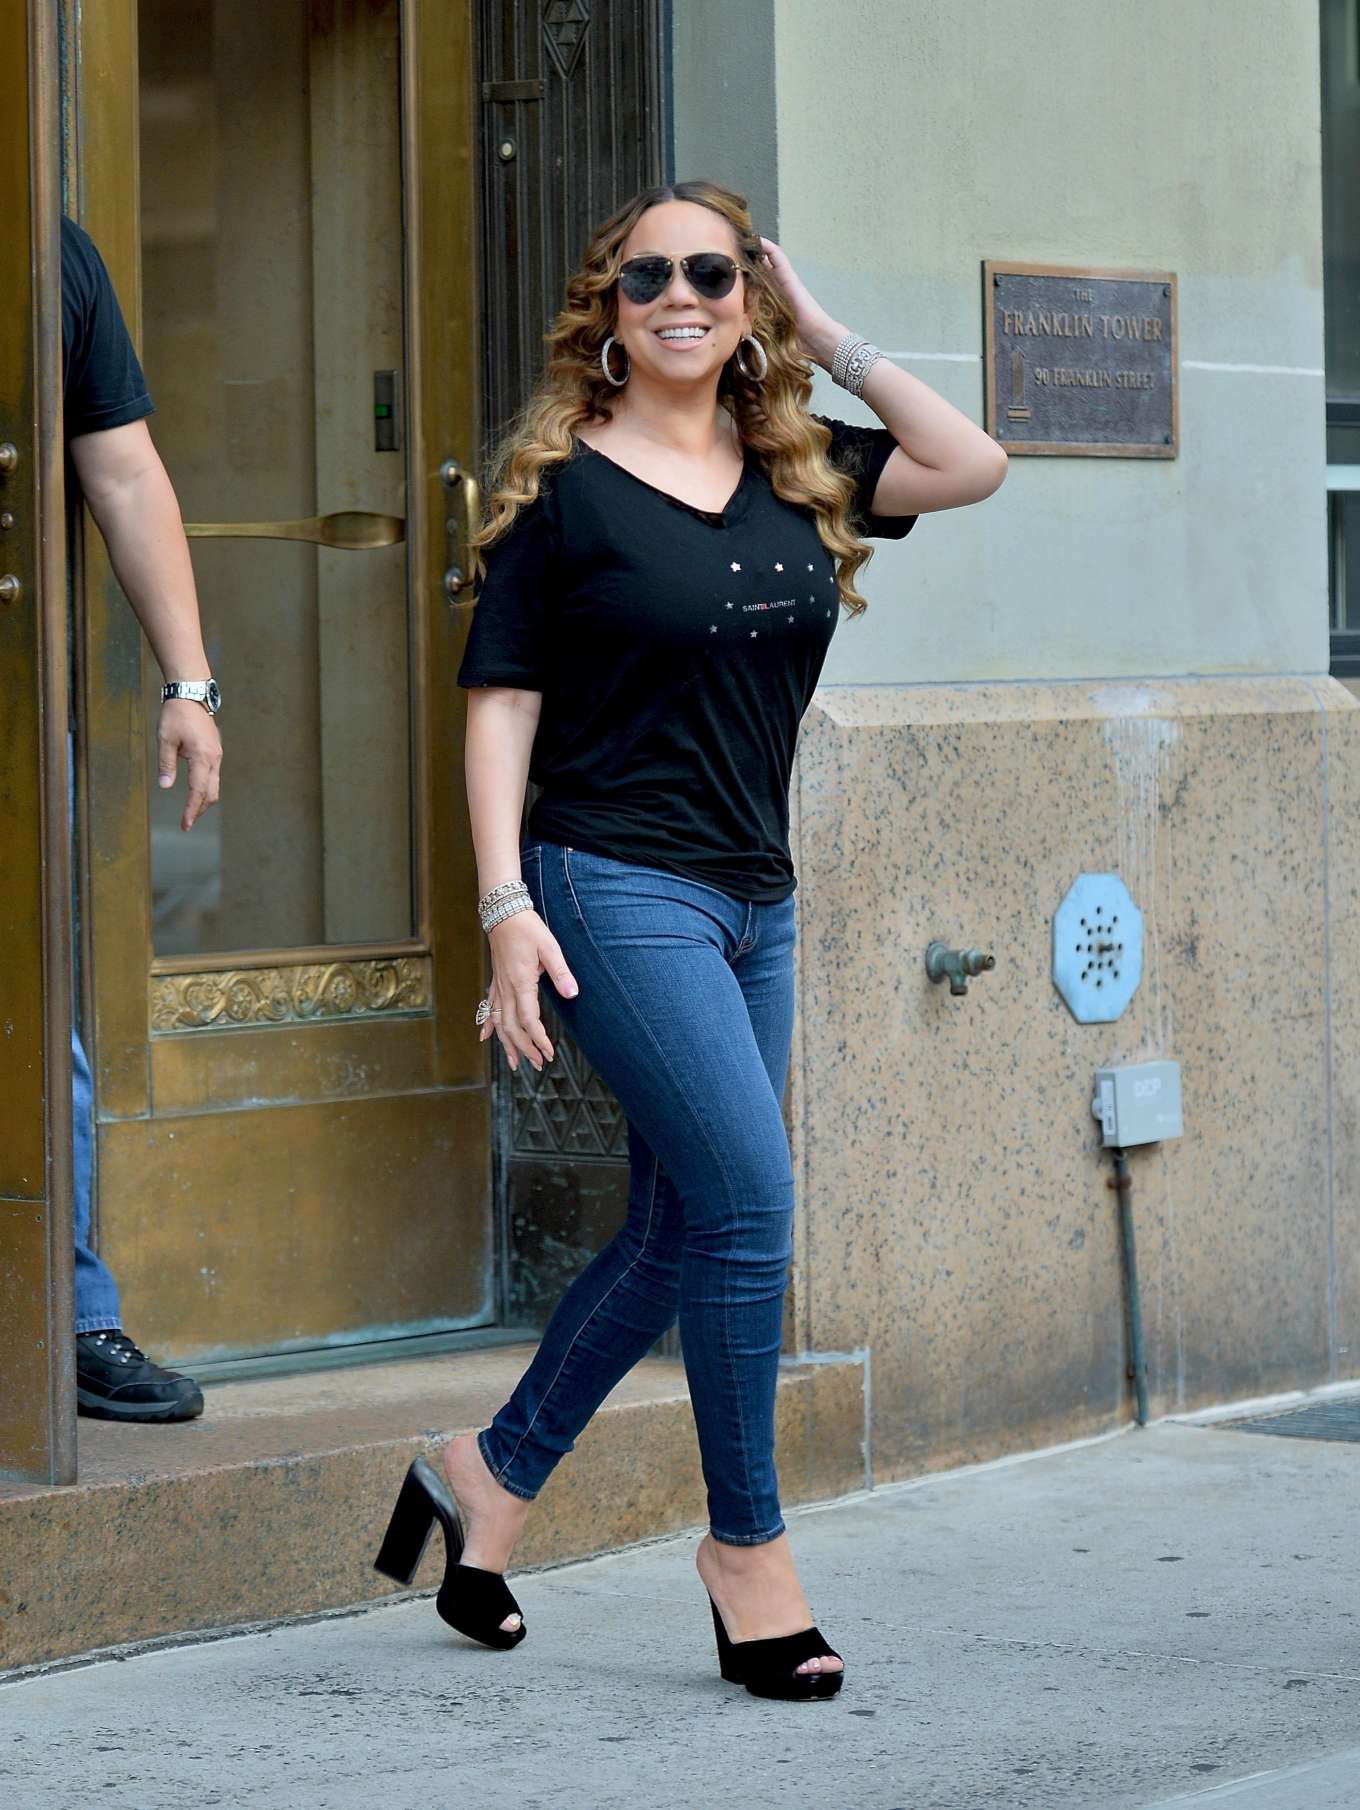 Mariah Carey â€“ In Jeans All smiles while out in New York City